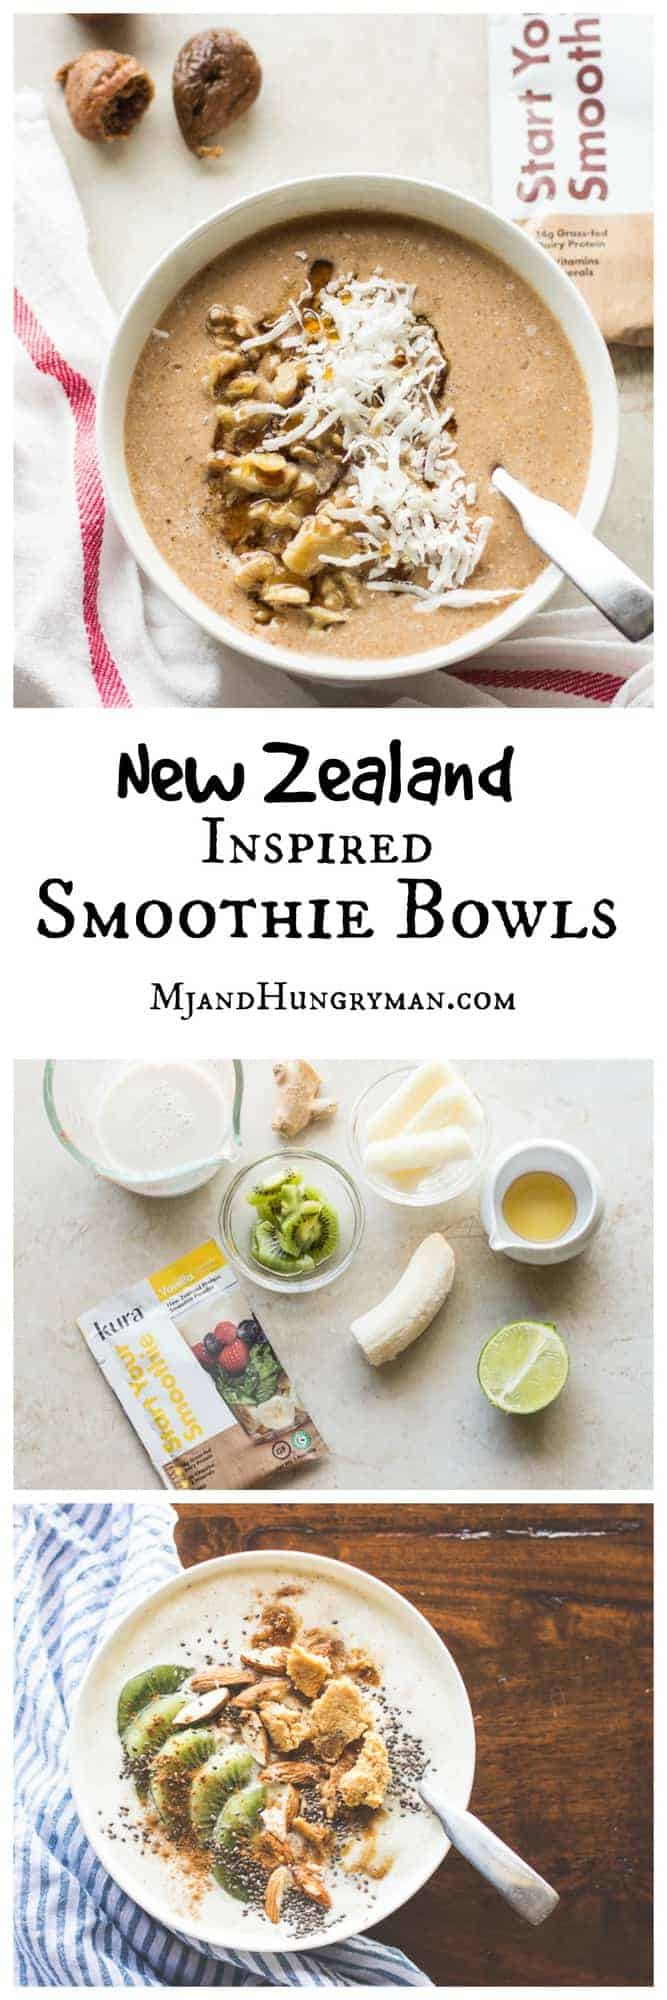 New Zealand Inspired Healthy Smoothie Bowls